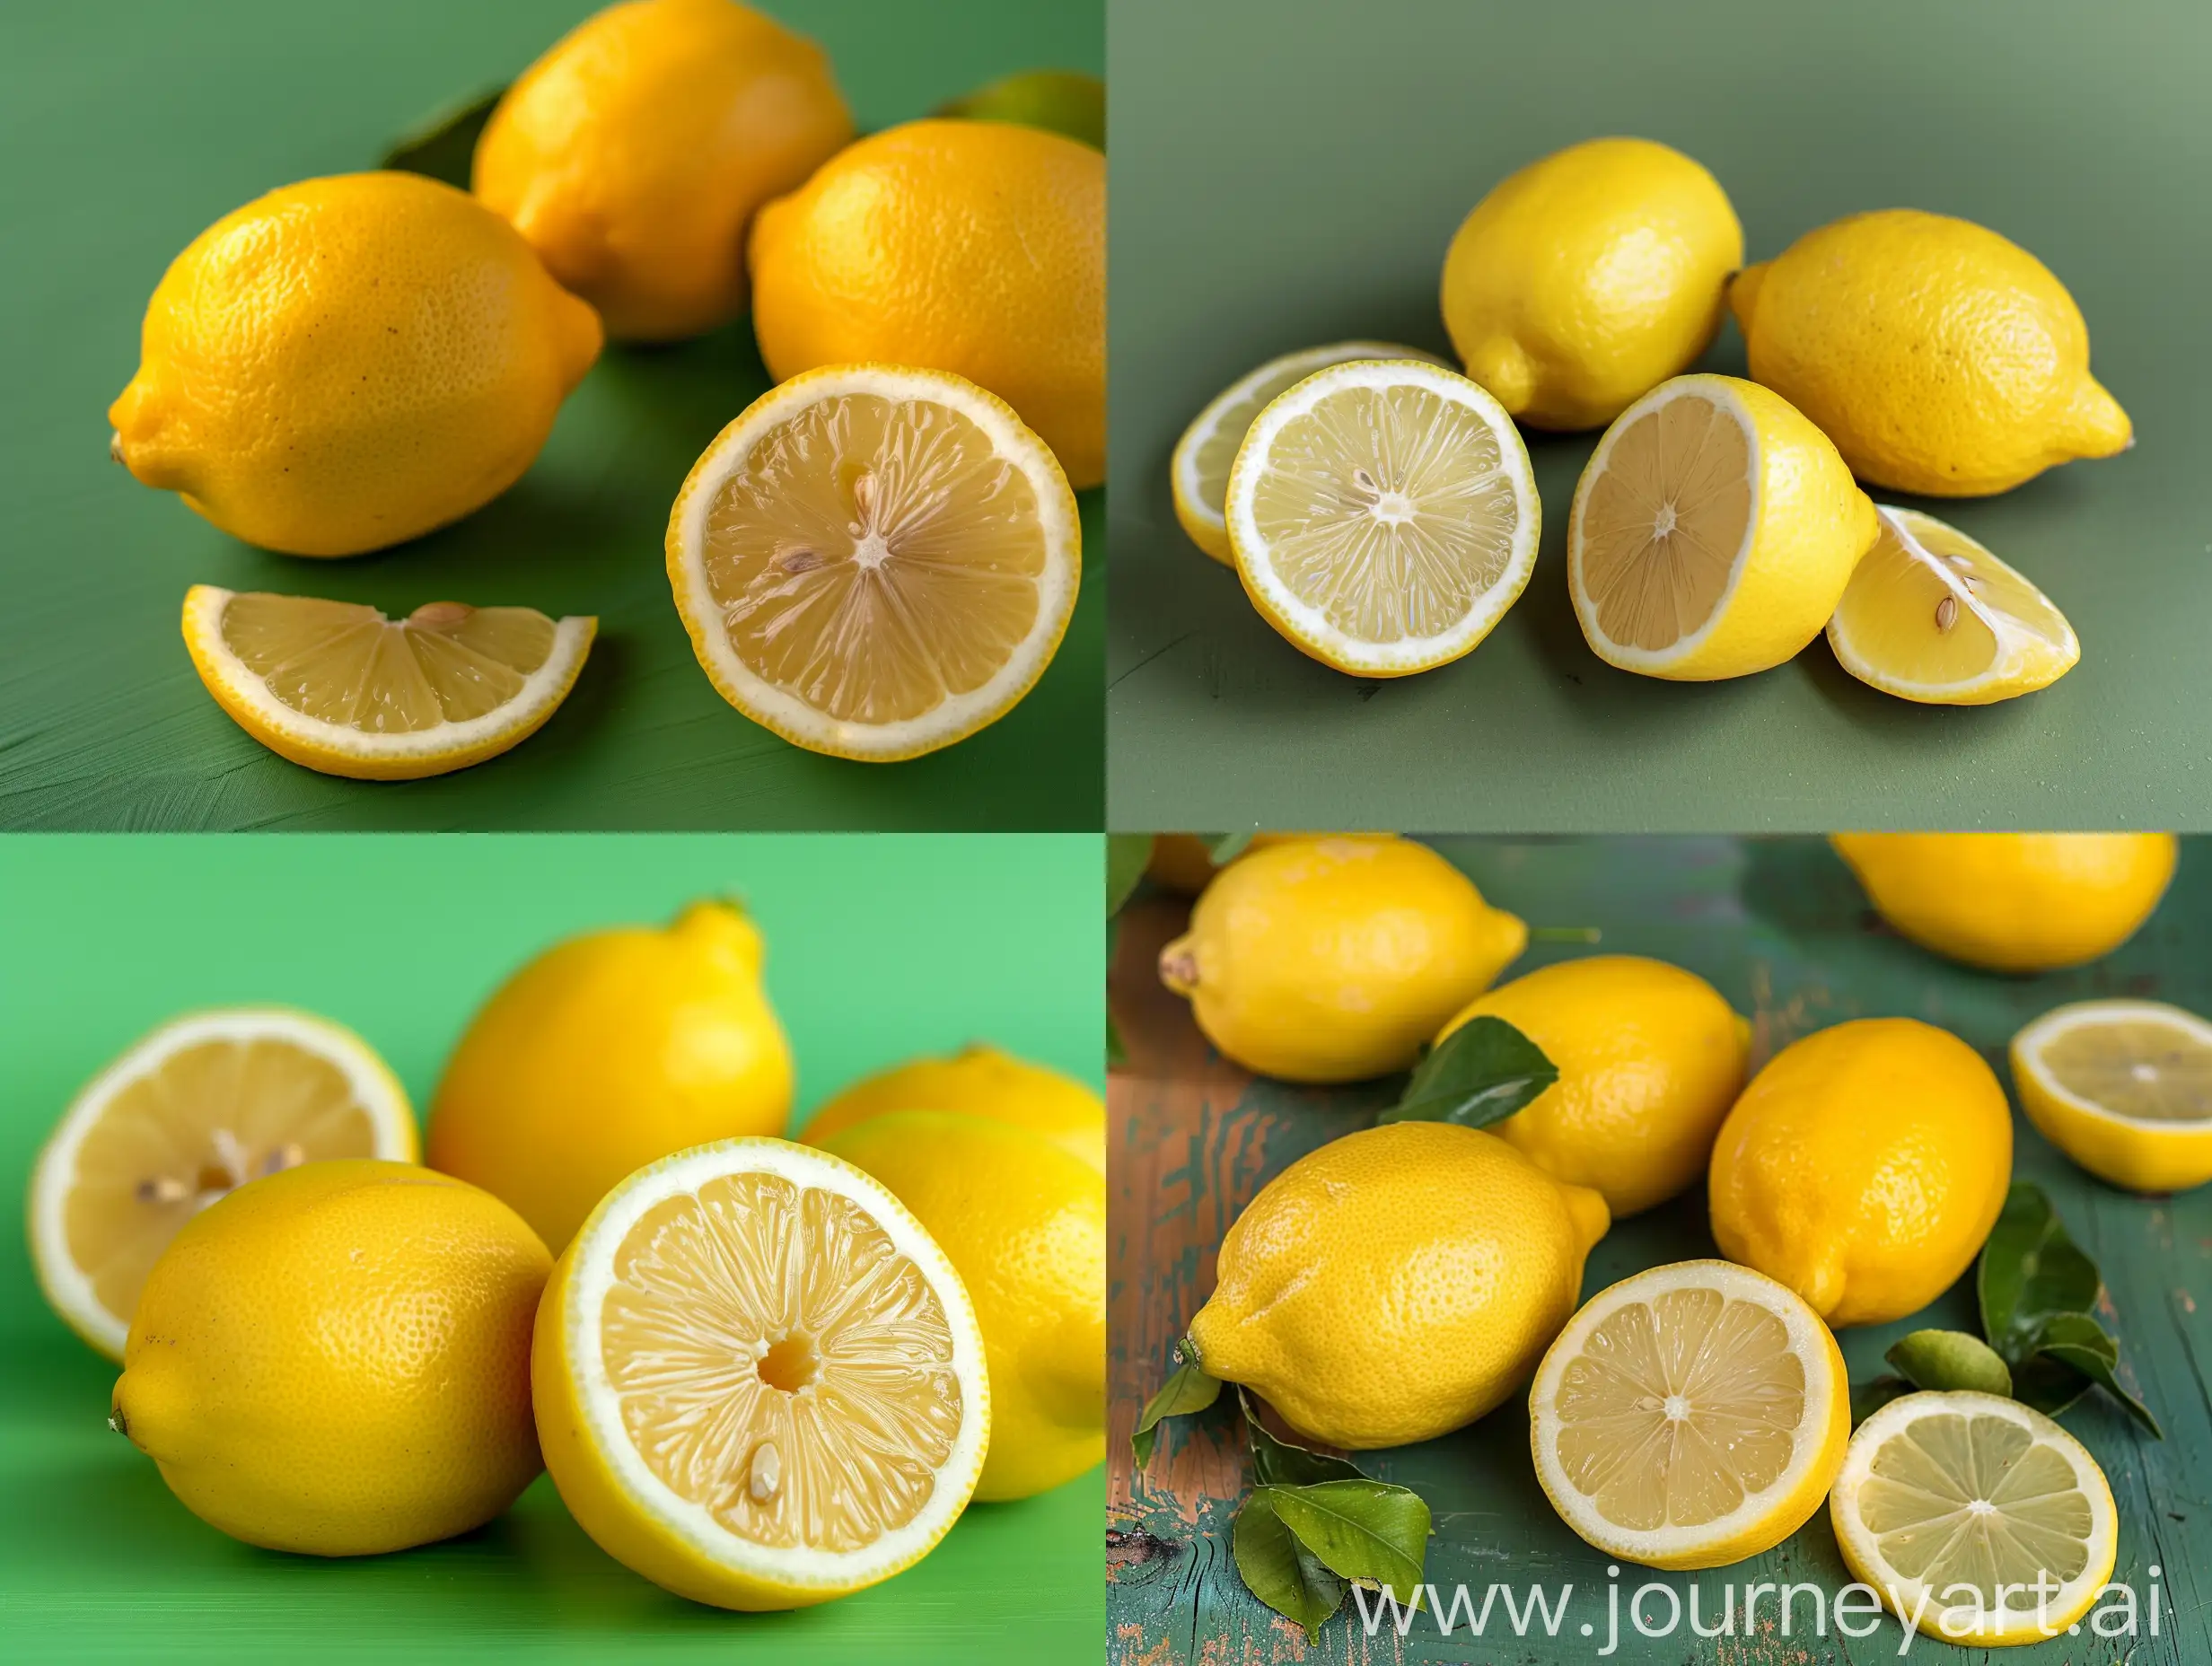 Real photo of some lemons on a green background